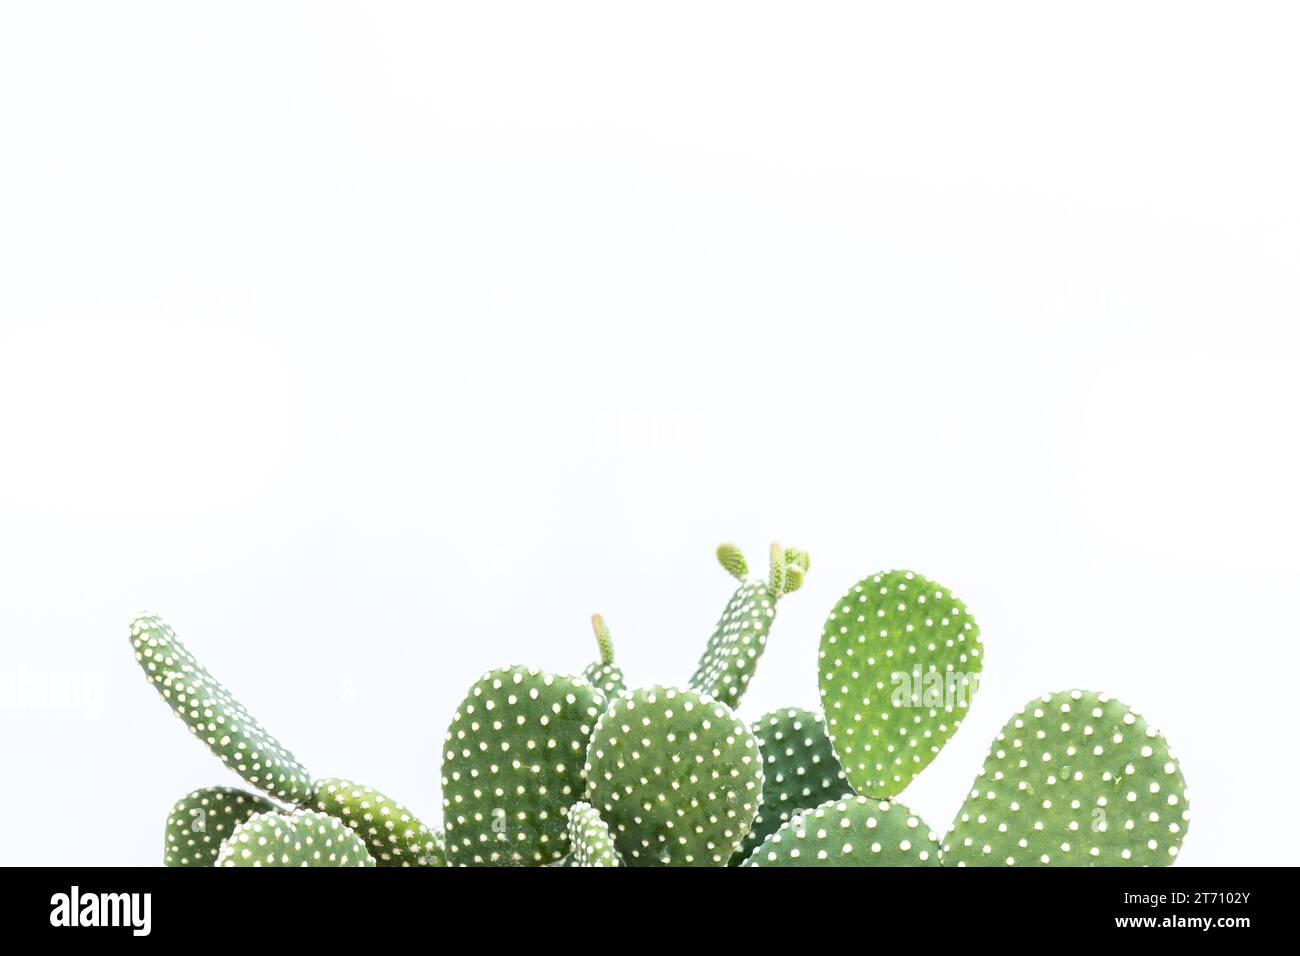 White dots opuntia microdasys prickly pear cactus with blank space for text Stock Photo